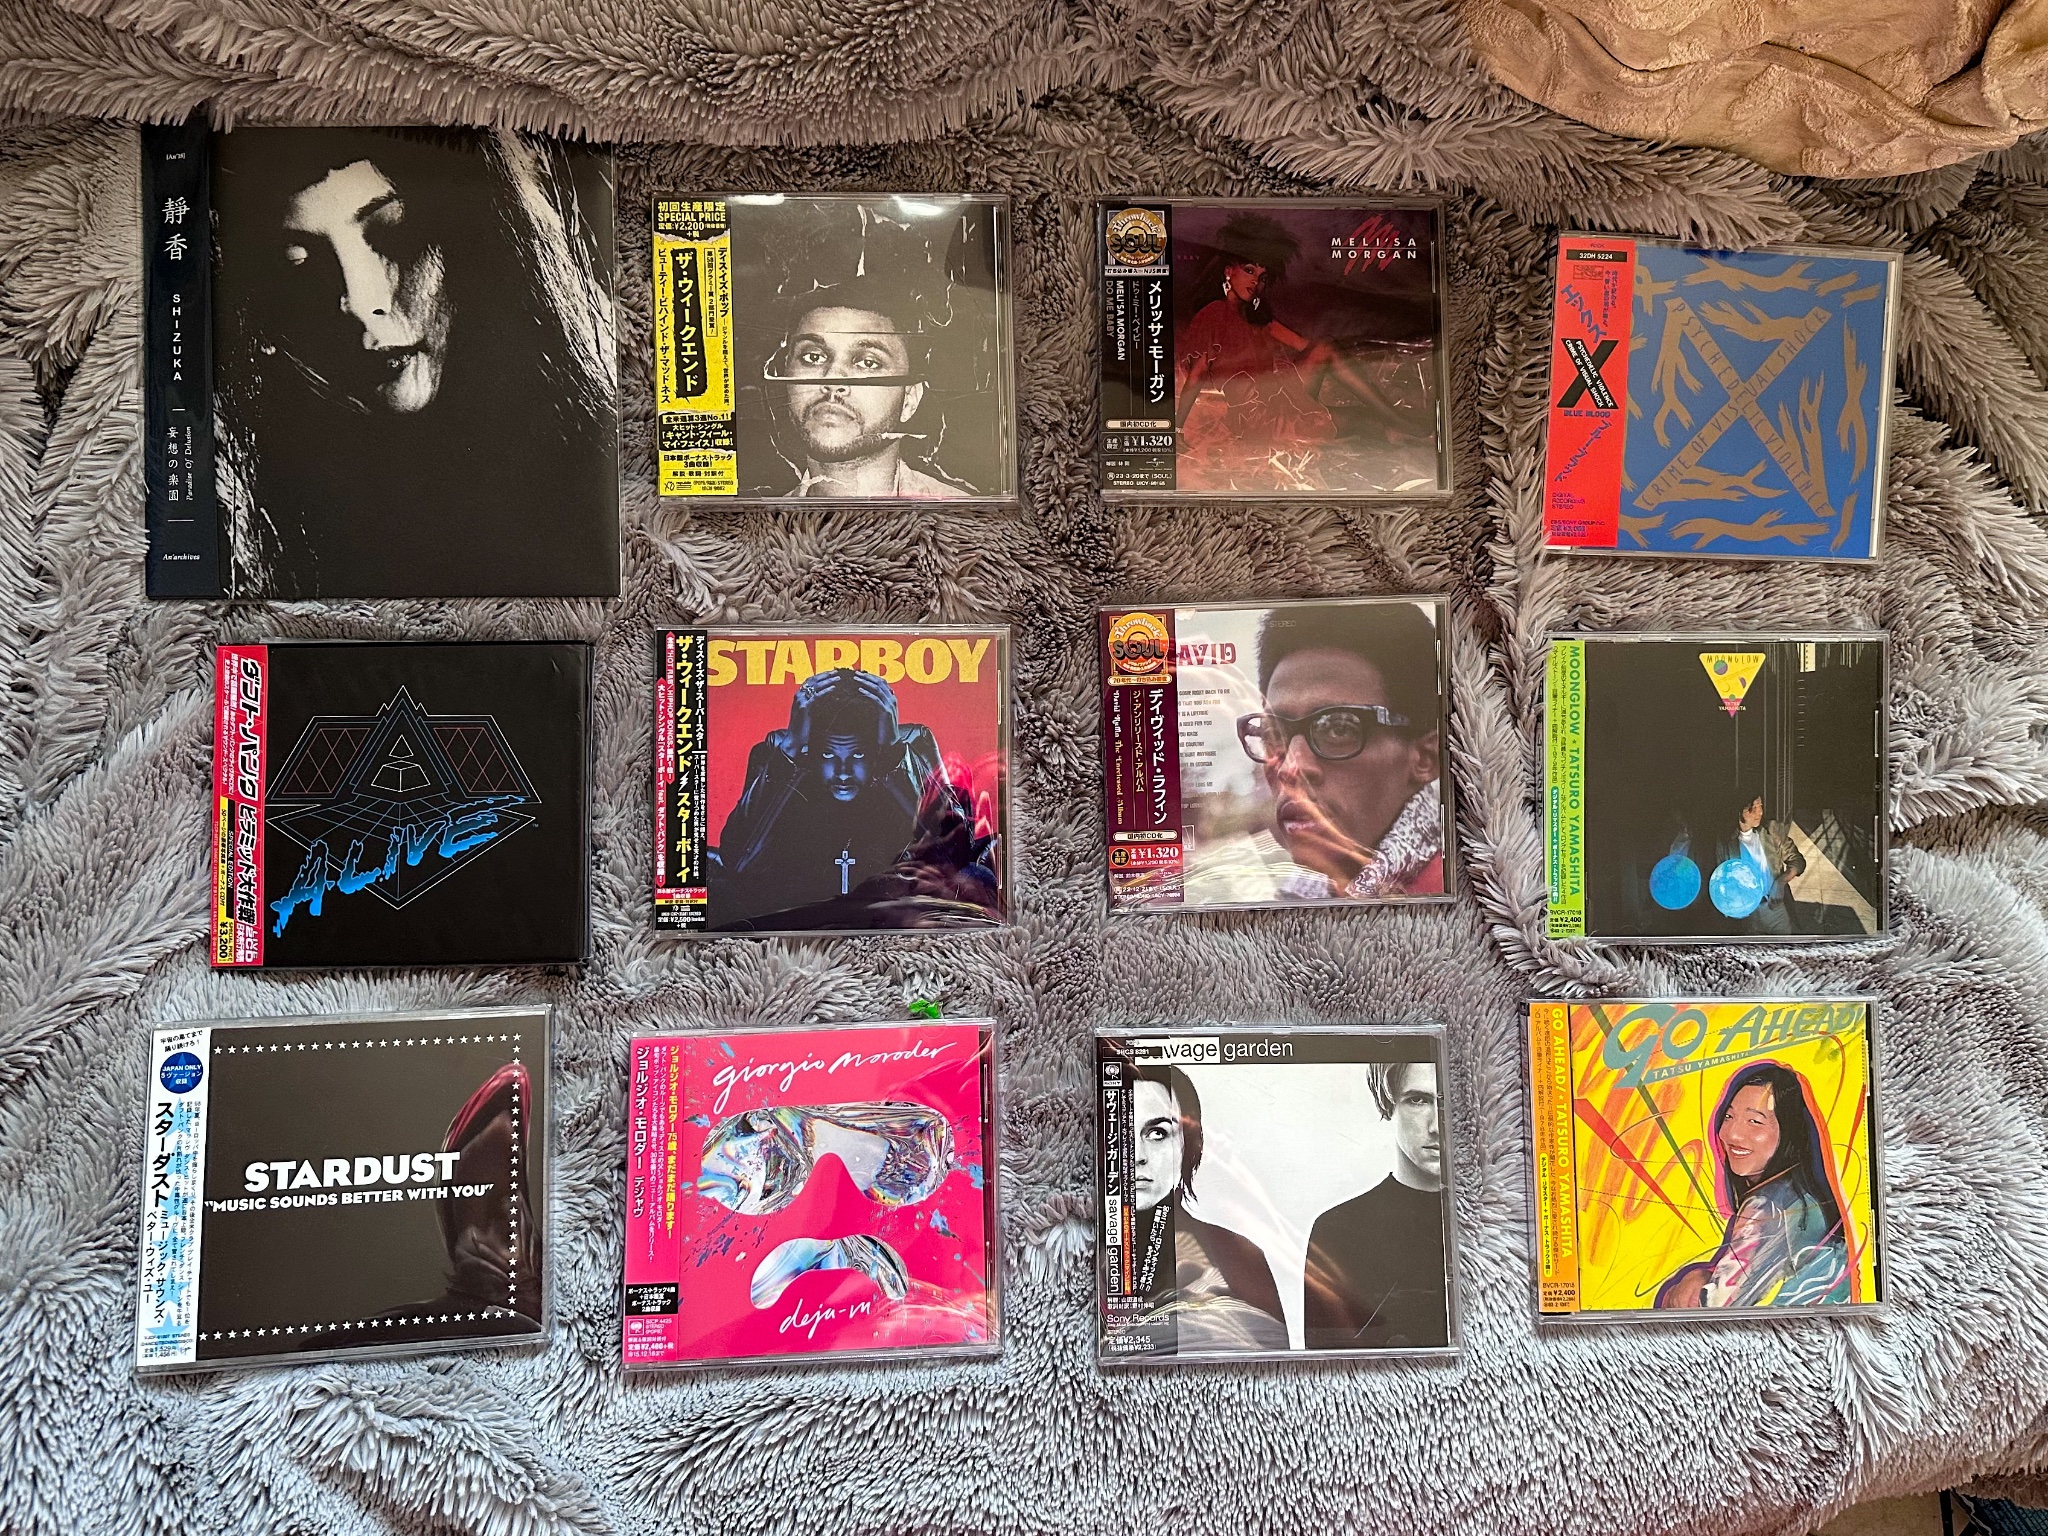  a bunch of CDs with the obis, Shizuka - Paradise of Delusion, Daft Punk - Alive 2007 (deluxe), Stardust - Music Sounds Better With You (maxi), The Weeknd - Beauty Behind the Madness, The Weeknd - Starboy, Giorgio Moroder - Deja Vu, Meli’sa Morgan - Do Me Baby, David Ruffin - The Unreleased Album, Savage Garden - Savage Garden, X Japan - Blue Blood, Tatsuro Yamashita - Moonglow, Tatsuro Yamashita - Go Ahead! 